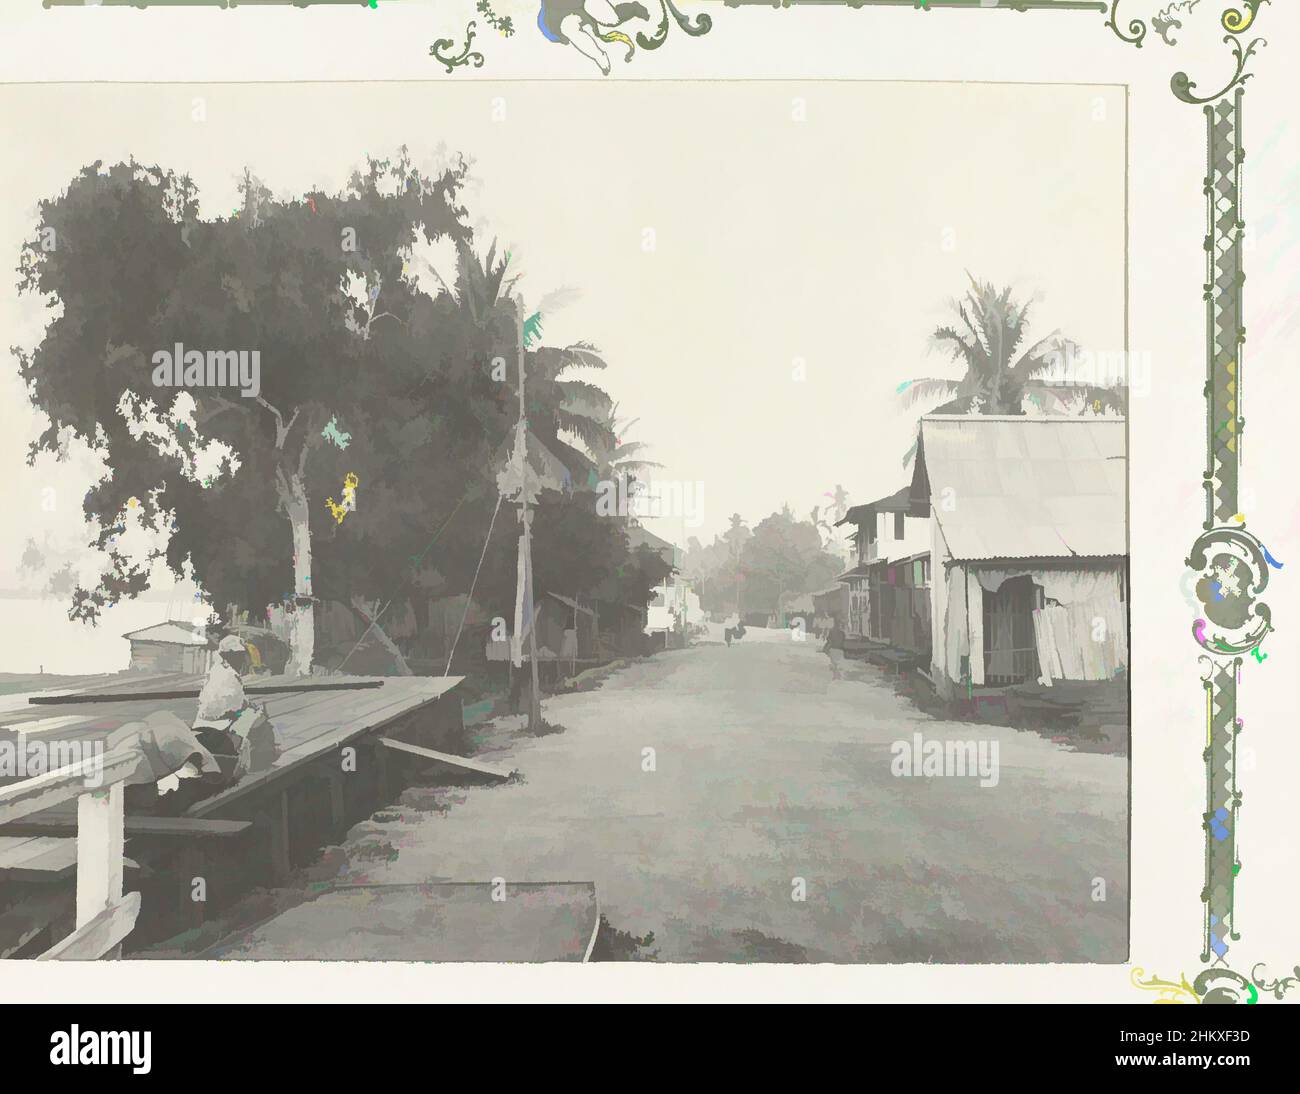 Art inspired by Road through port town, A road through a port town, in the foreground on the left a carrier rests. Photo in the photo album on oil extraction in Borneo by the Royal Dutch Petroleum Company (KNPM) in the years 1903-1907., Kalimantan, 1903 - 1907, paper, gelatin silver, Classic works modernized by Artotop with a splash of modernity. Shapes, color and value, eye-catching visual impact on art. Emotions through freedom of artworks in a contemporary way. A timeless message pursuing a wildly creative new direction. Artists turning to the digital medium and creating the Artotop NFT Stock Photo